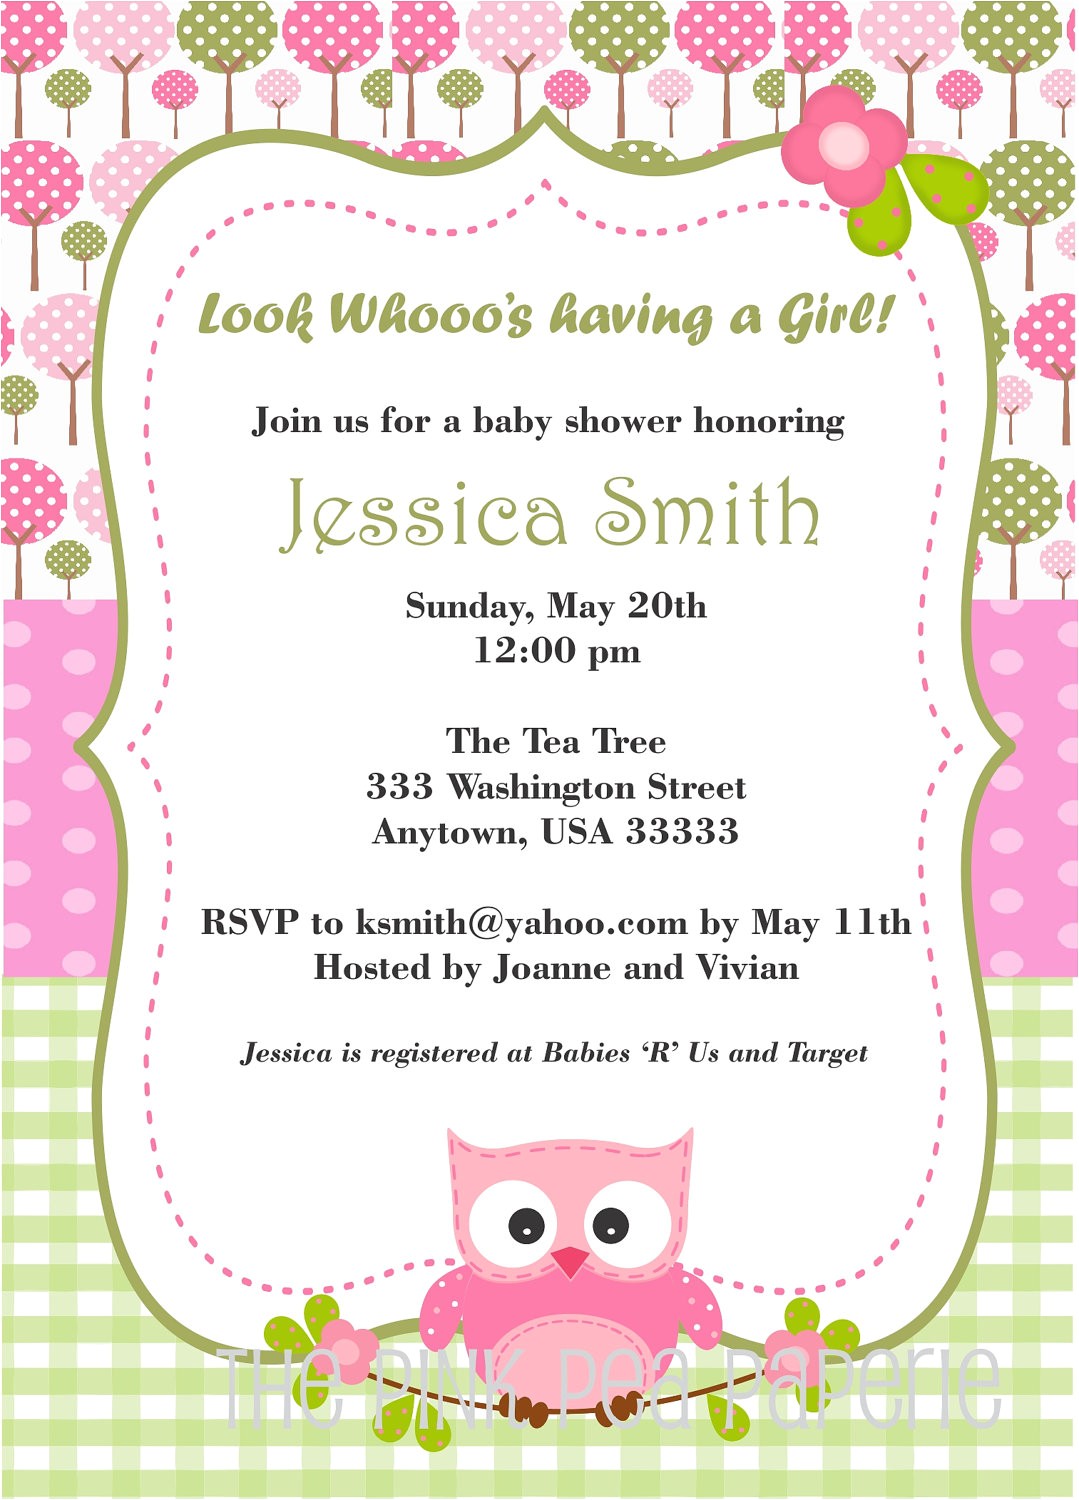 Buy Baby Shower Invitations Online Template Buy Baby Shower Invitations In Store Discount